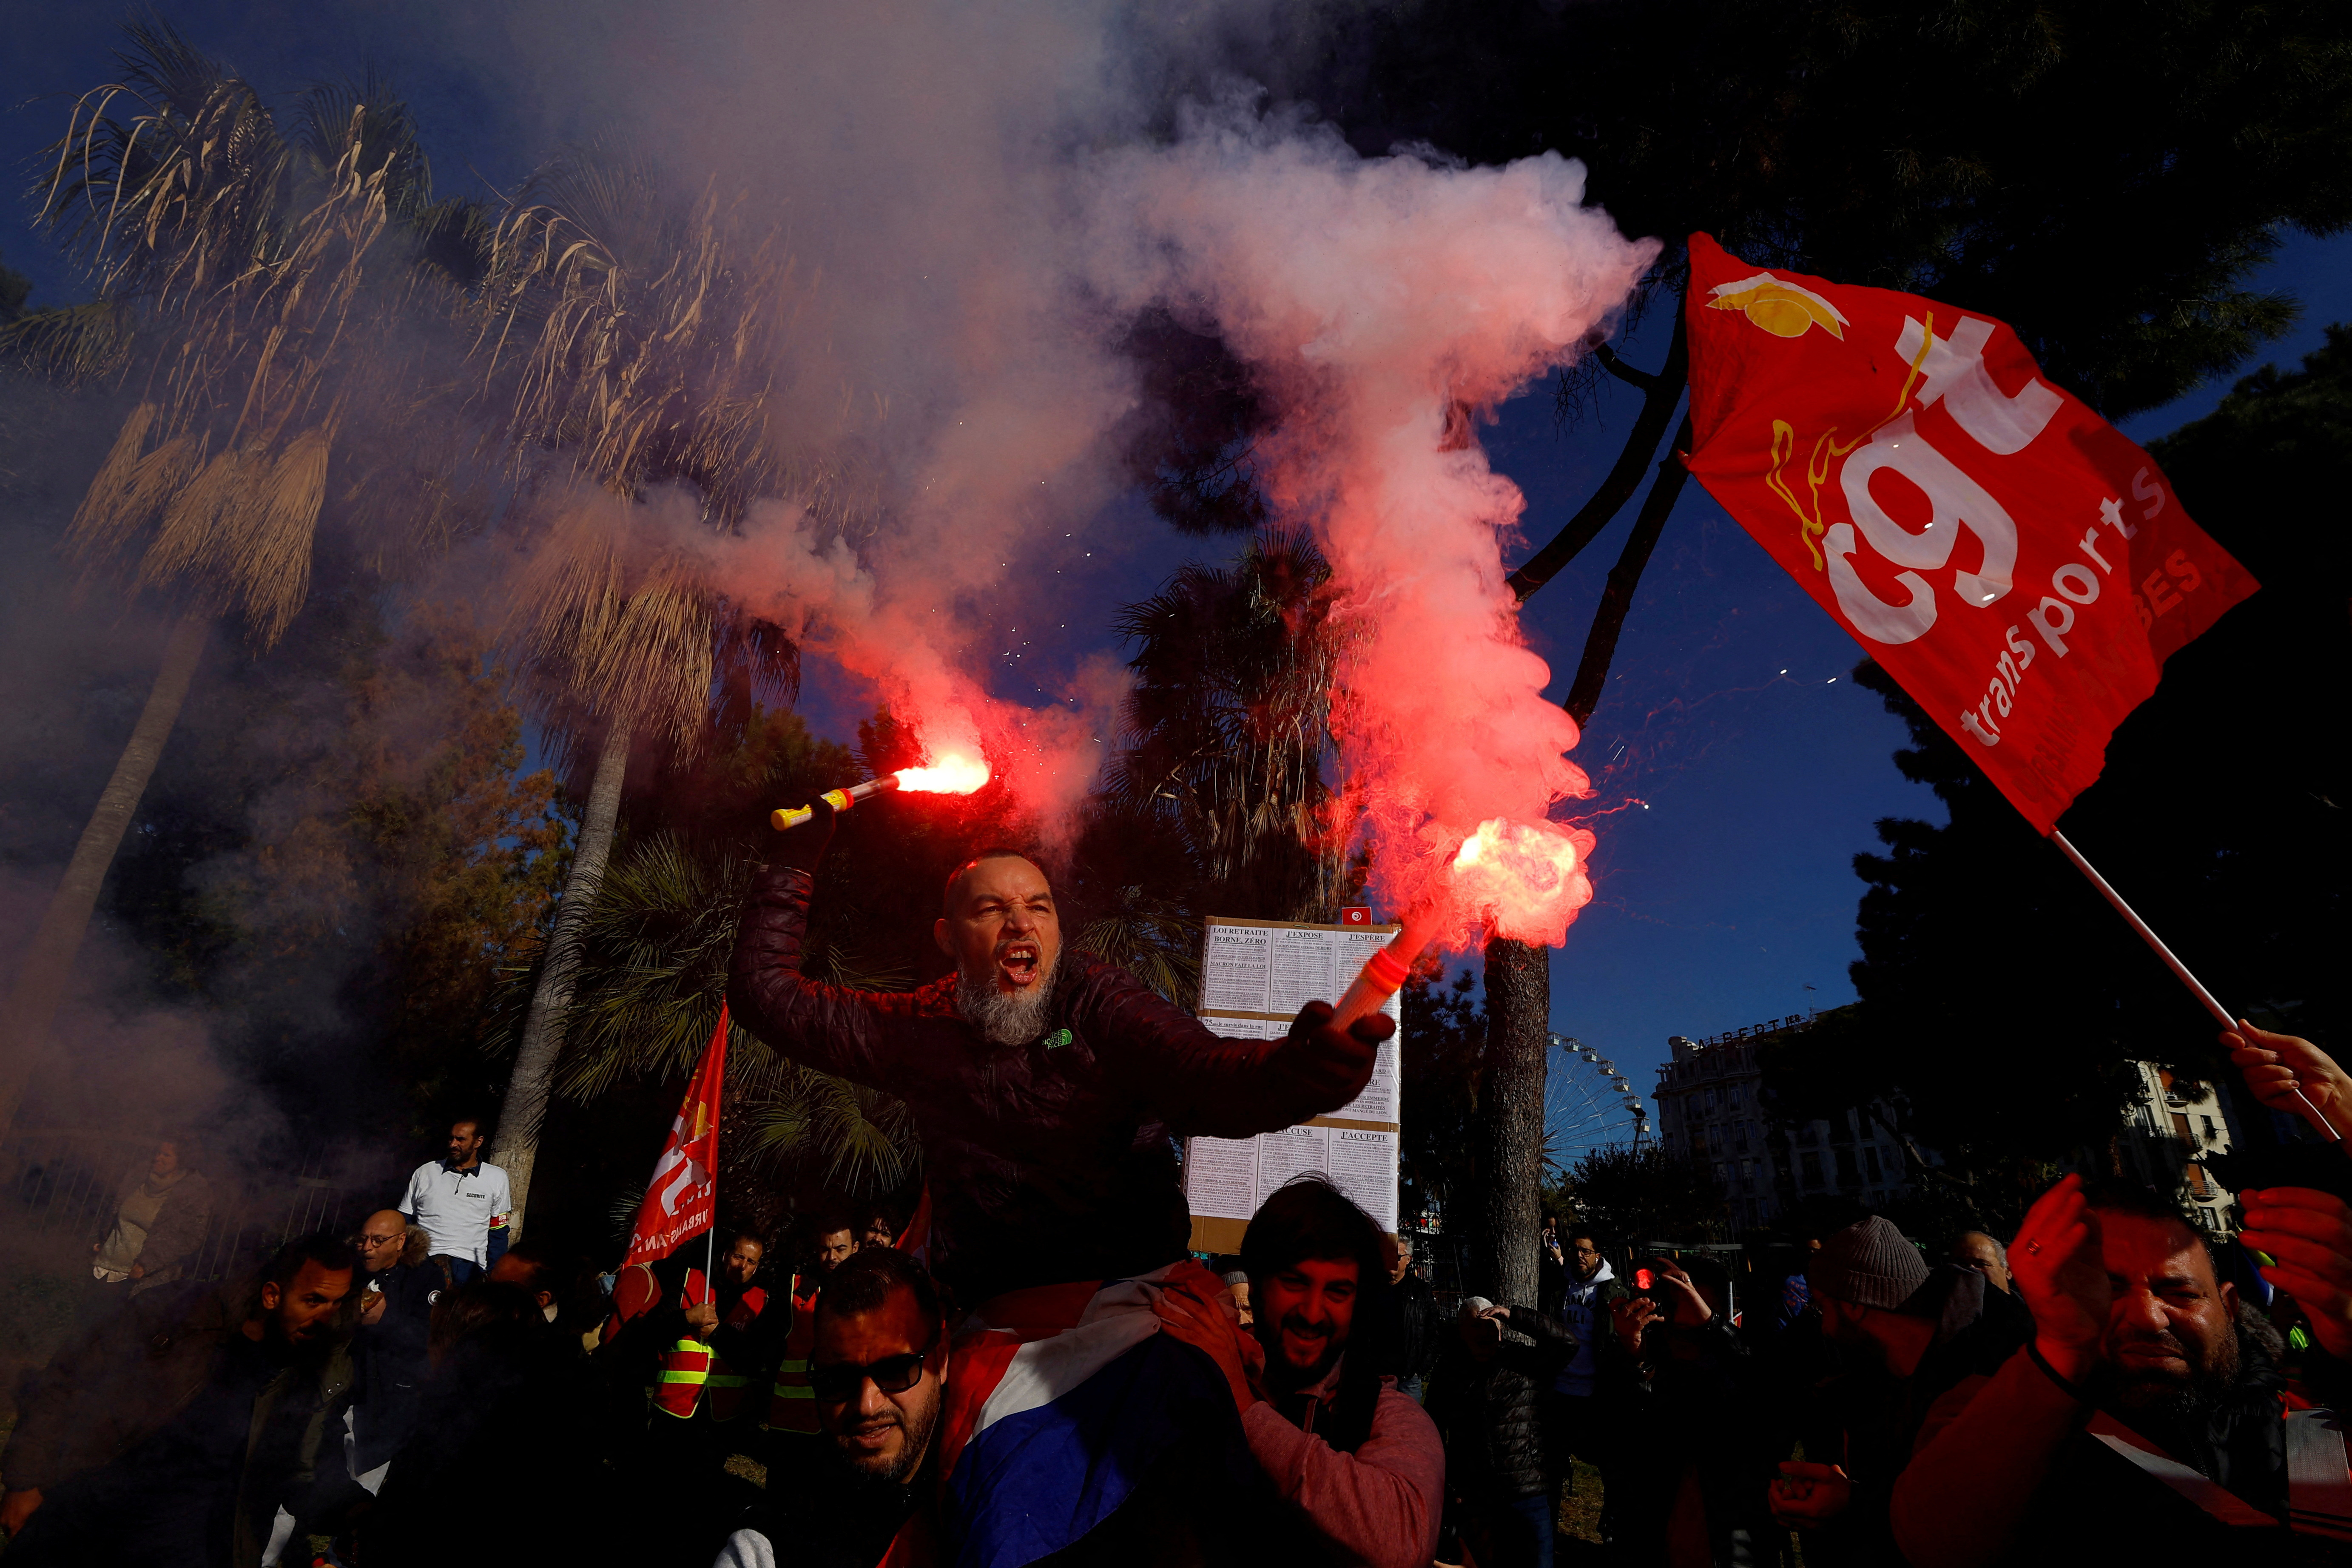 Third nationwide day of protests in France against pension reform